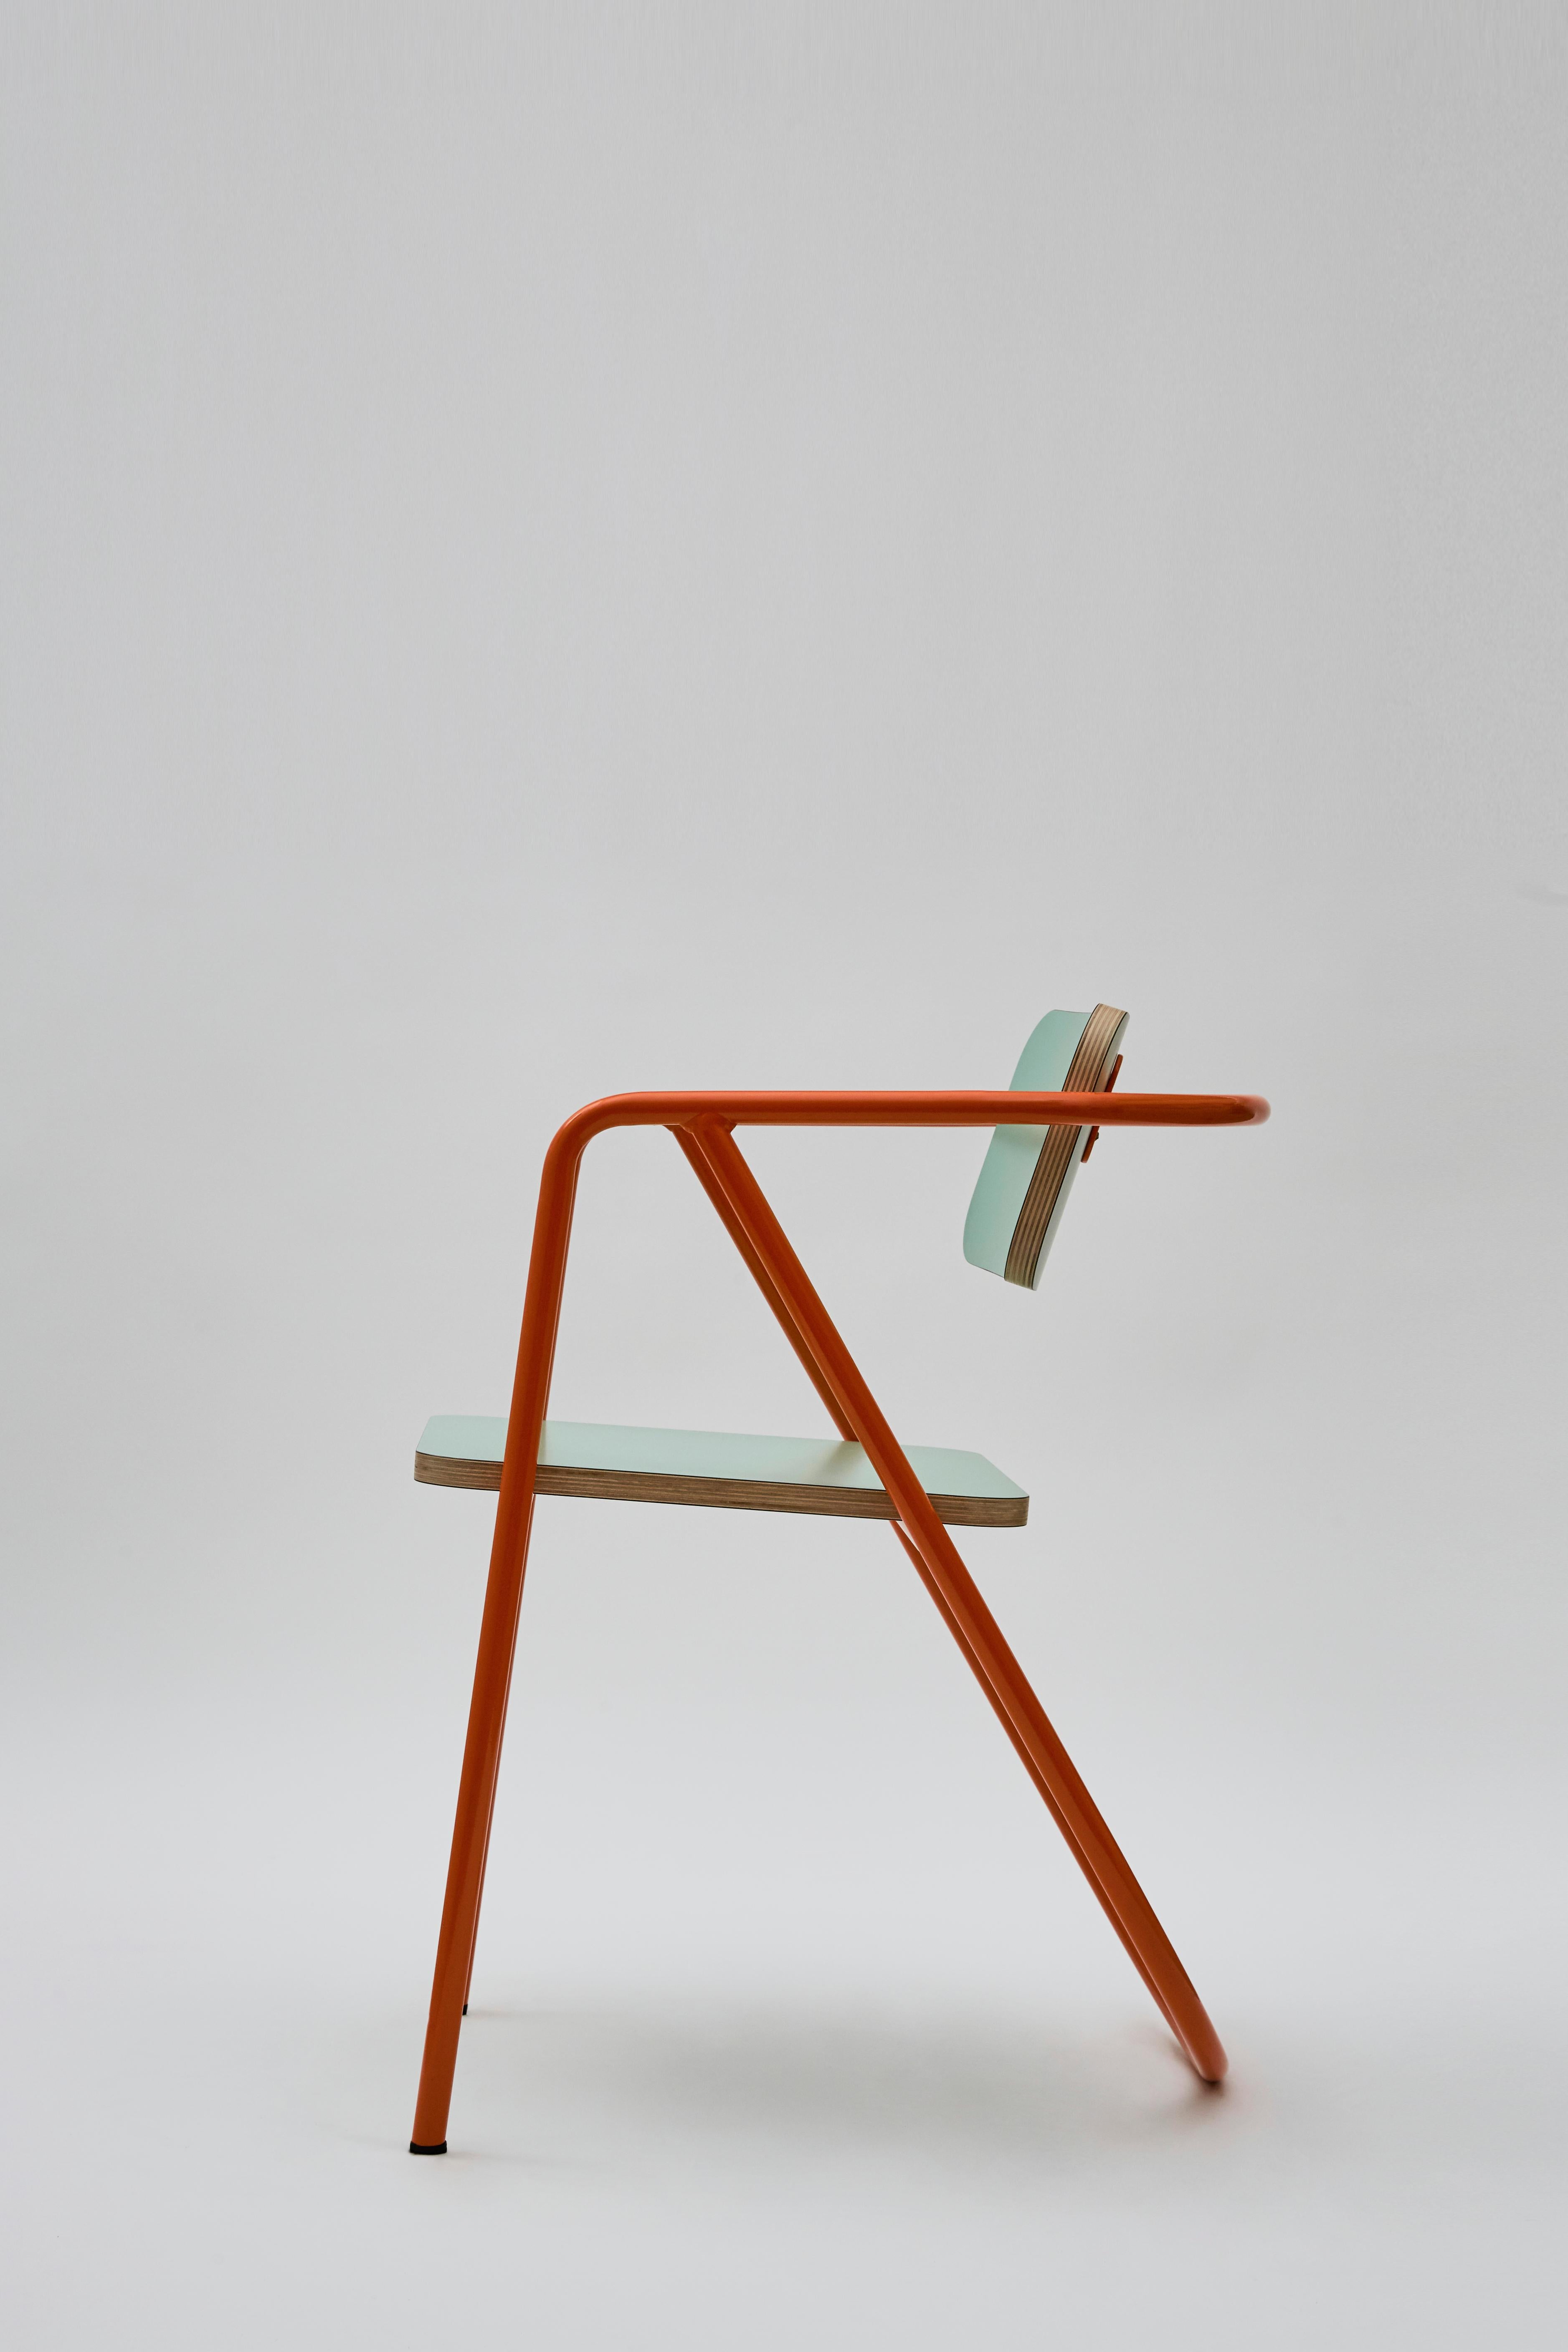 Other La Misciù Chair, Teal and Orange For Sale